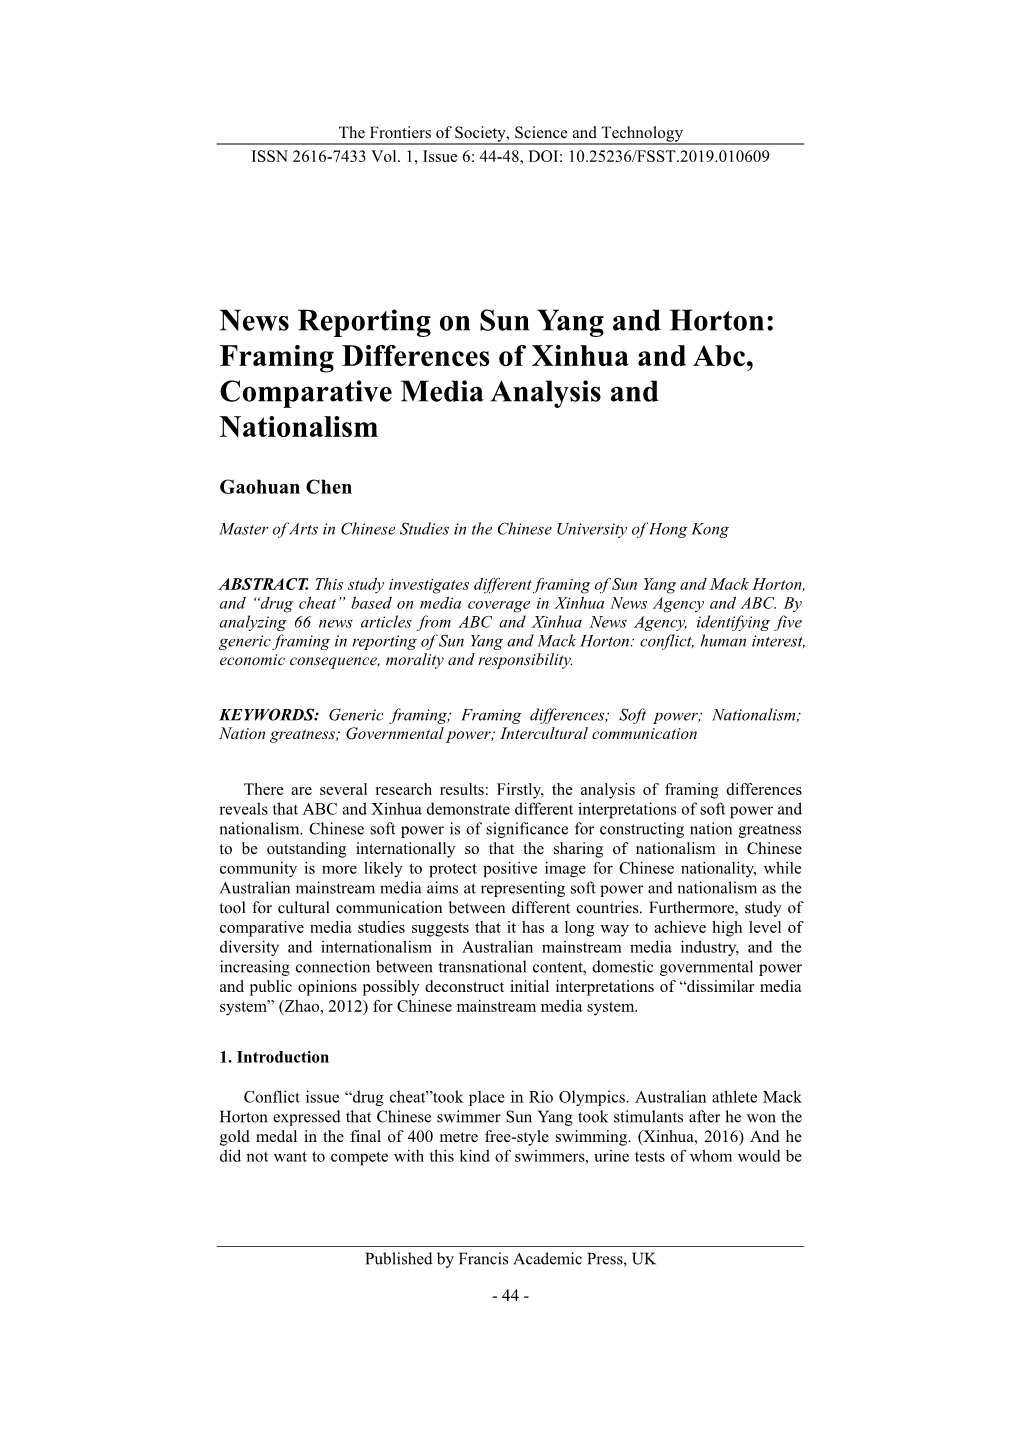 News Reporting on Sun Yang and Horton: Framing Differences of Xinhua and Abc, Comparative Media Analysis and Nationalism